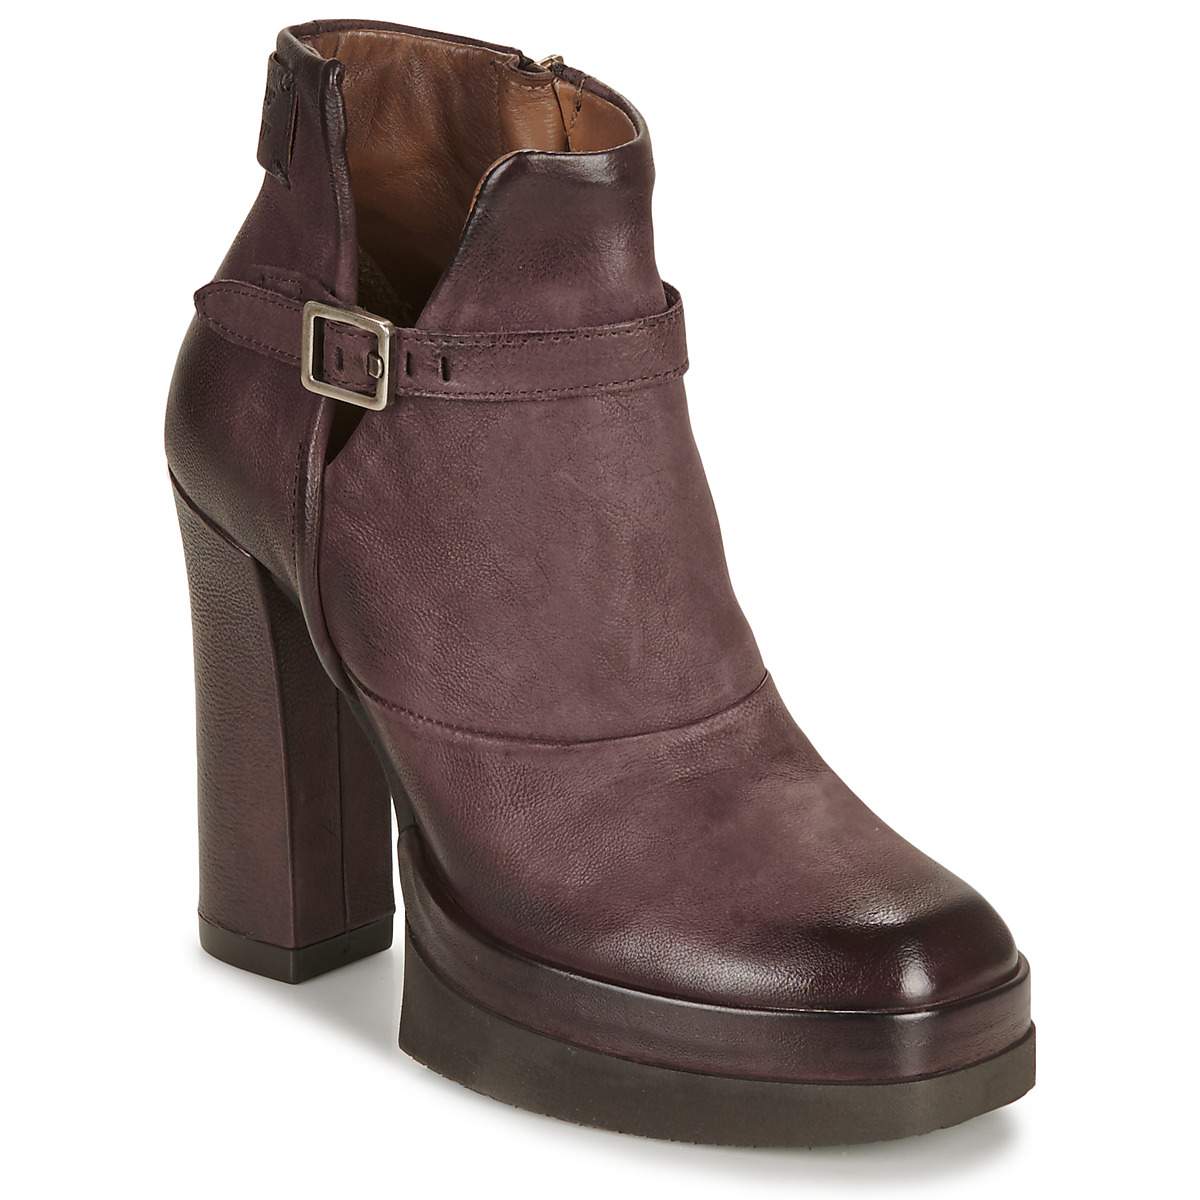 airstep / a.s.98  vivent buckle  women's low ankle boots in bordeaux